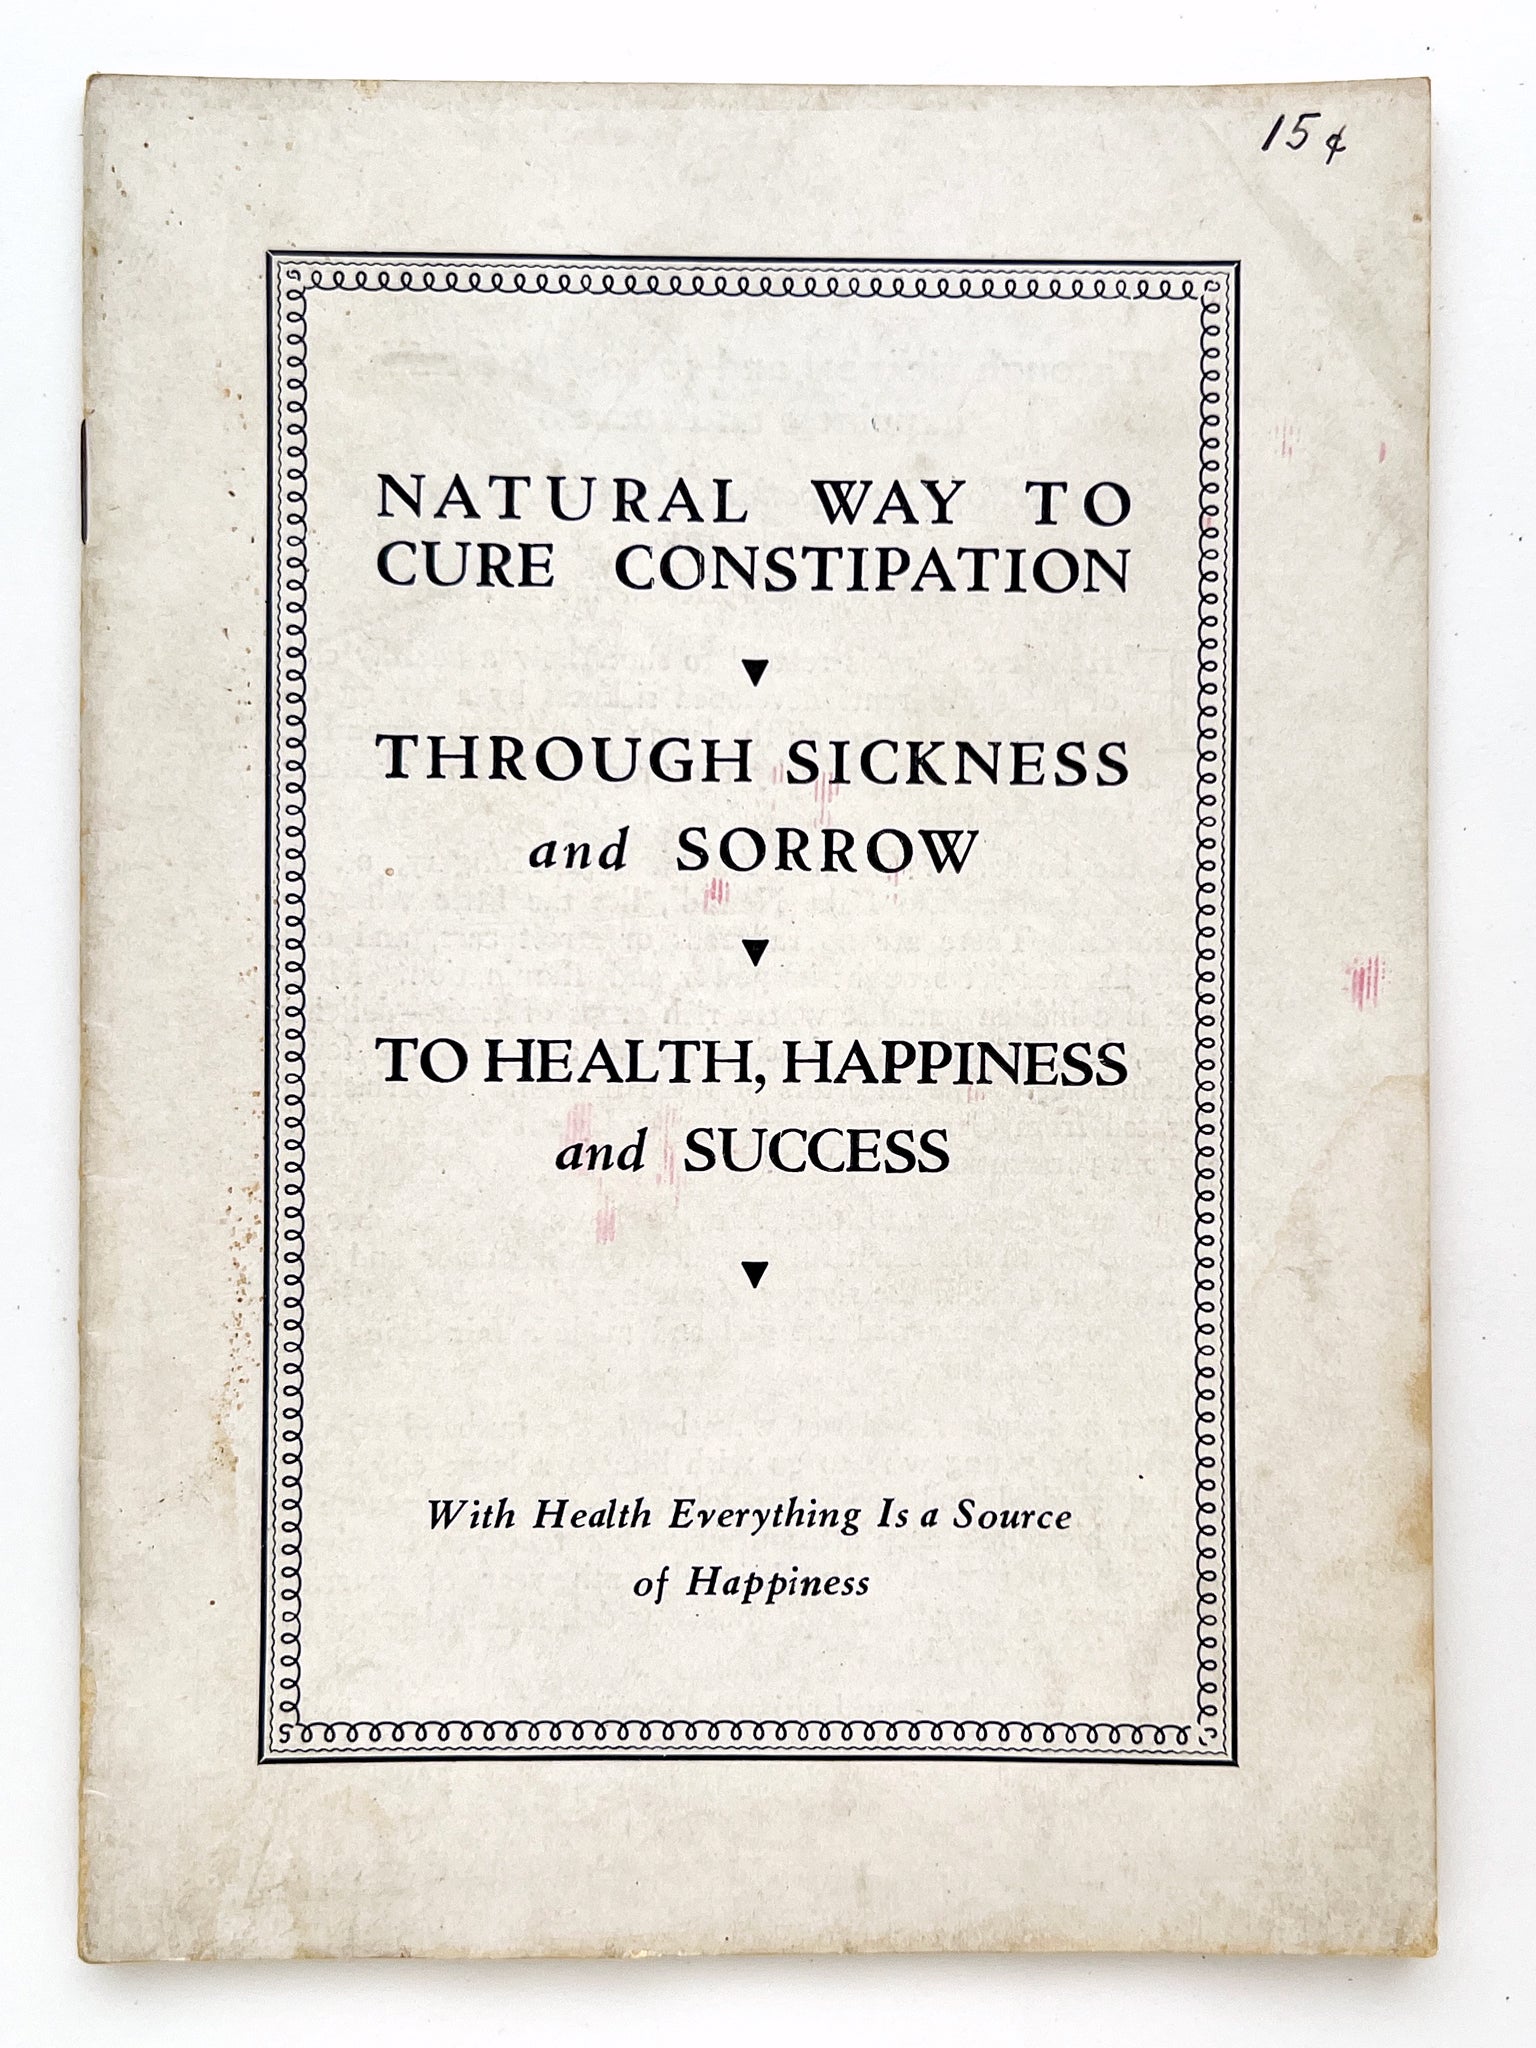 Natural Way to Cure Constipation - Through Sickness and Sorrow to Health, Happiness and Success; Conquest of Constipation, Psoriasis, Neuralgia and Gout